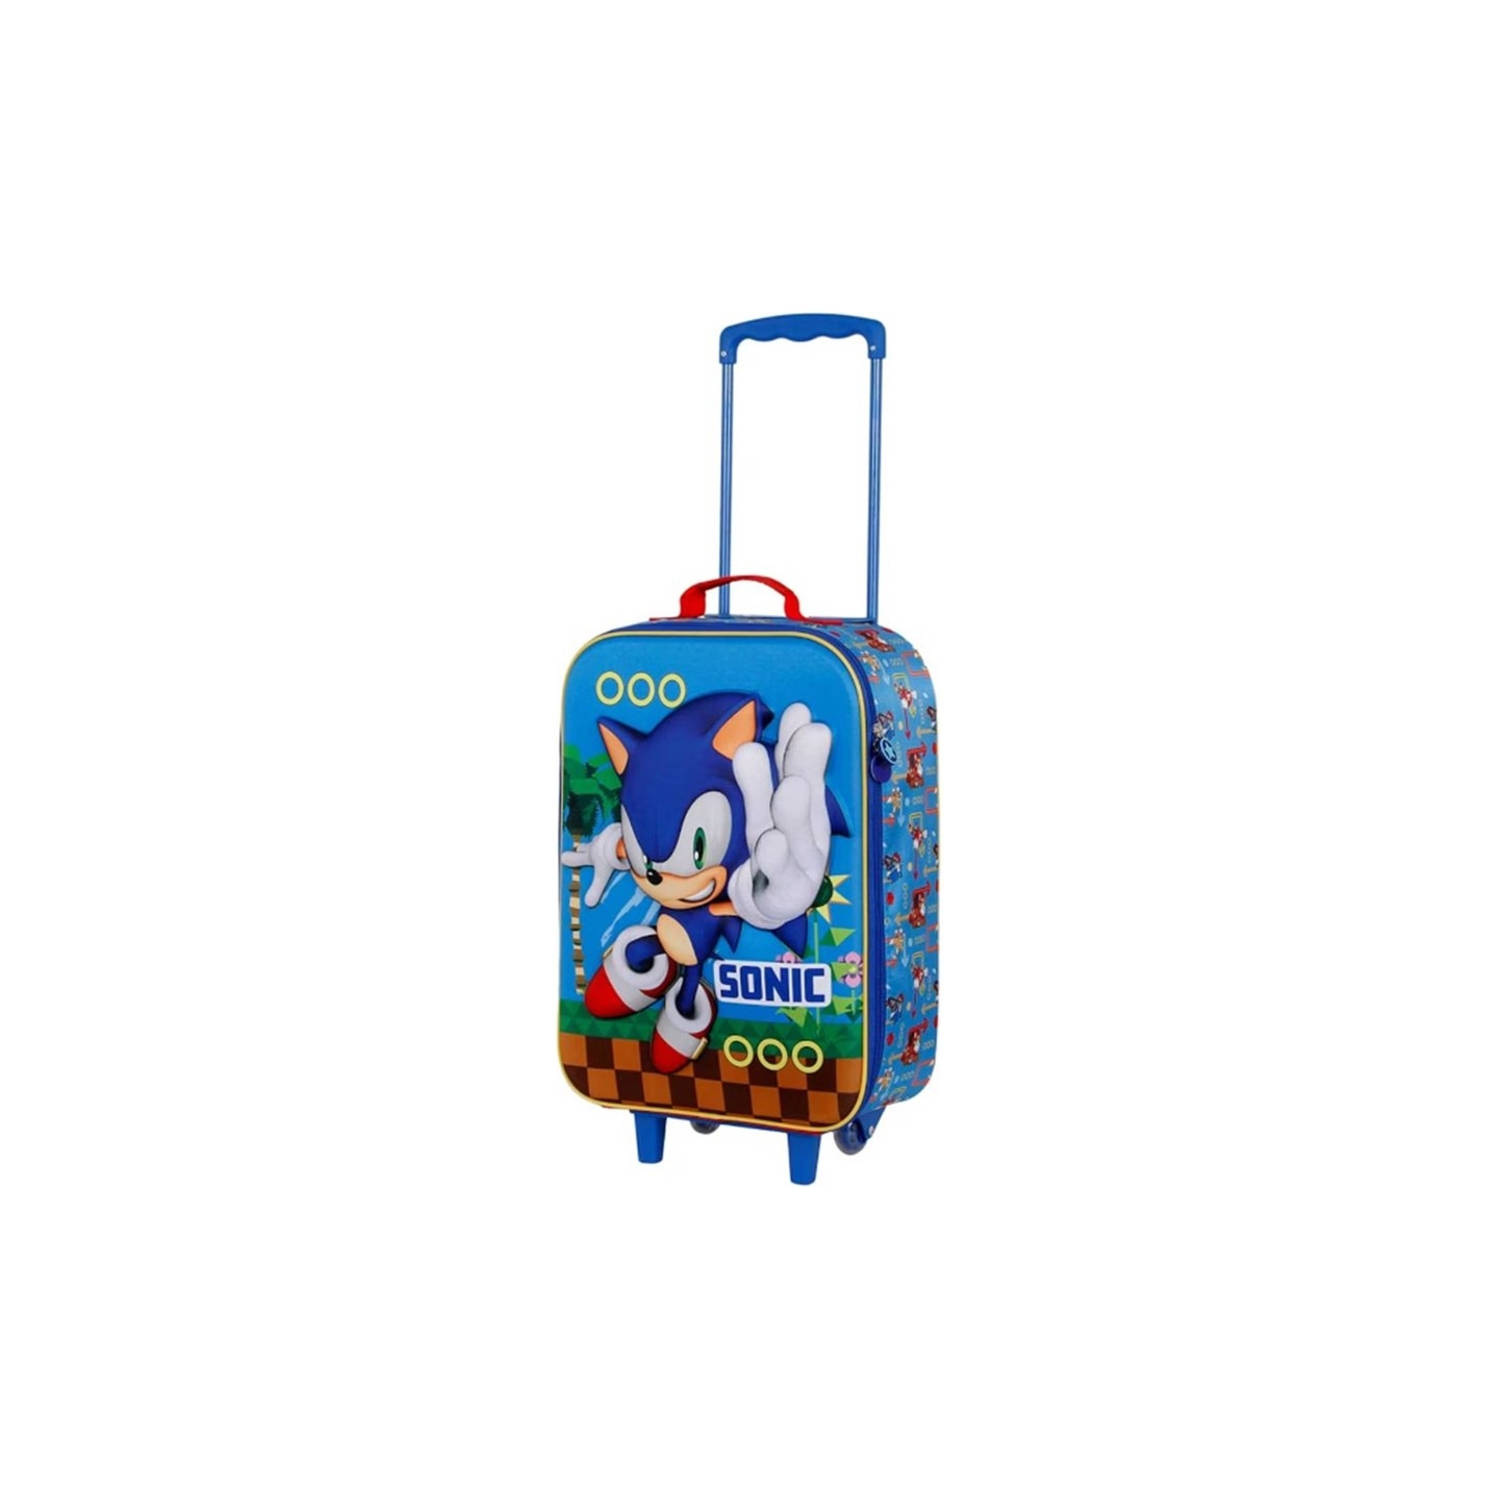 Sonic The Hedgehog - Trolley - Kinderkoffer - 50 cm